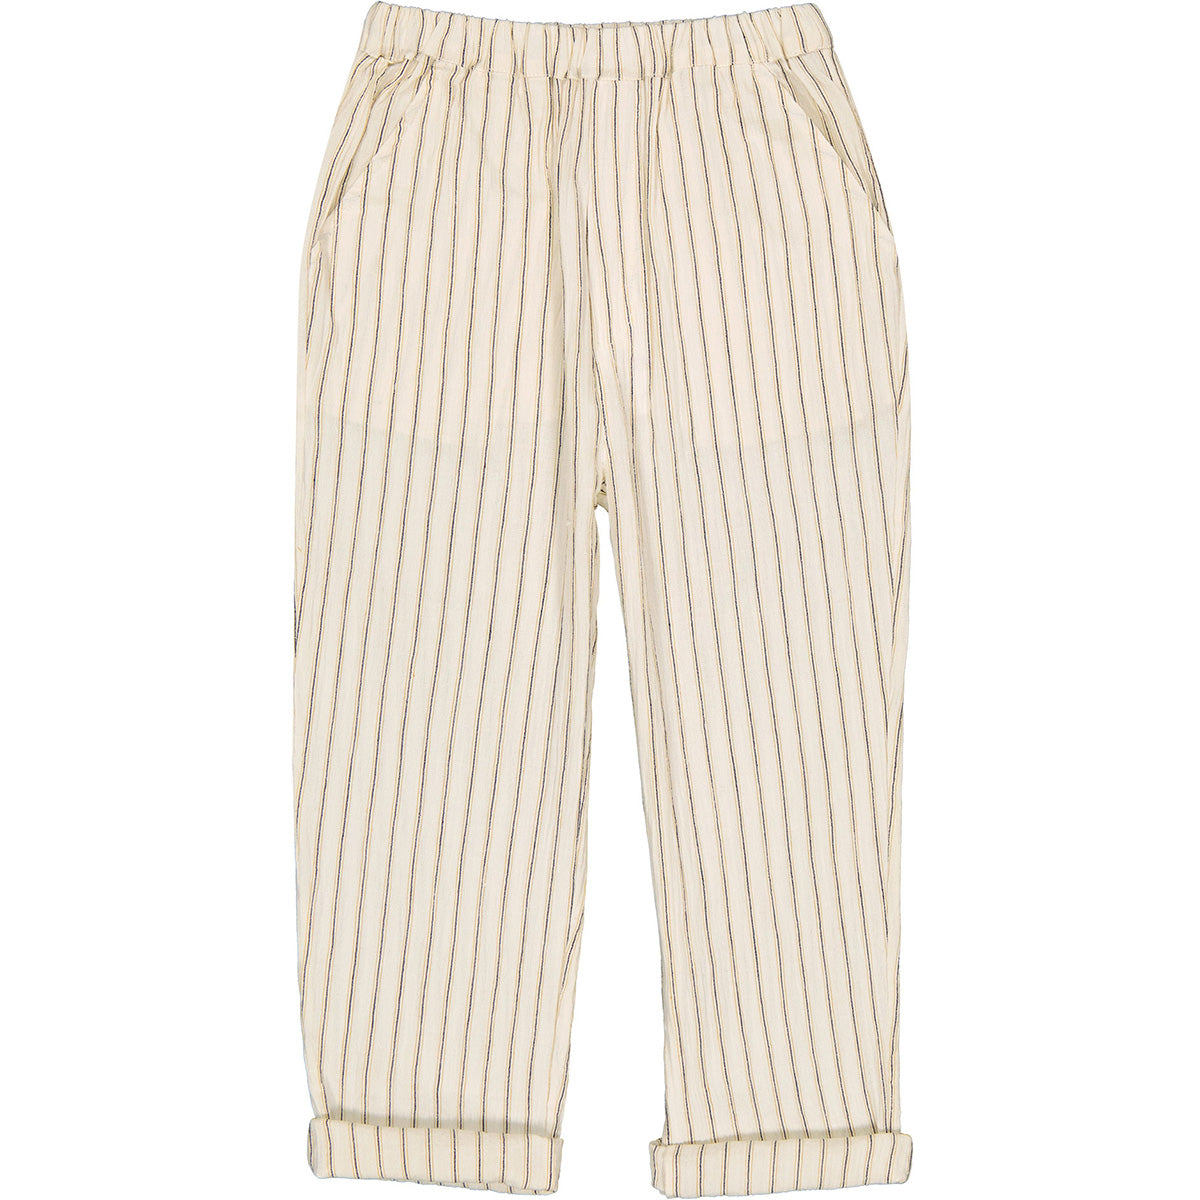 The Gazelle Cotton Crepe Stripe Pants from Louis Louise. Elasticated waistband for easy slip-on, two patch pockets on back